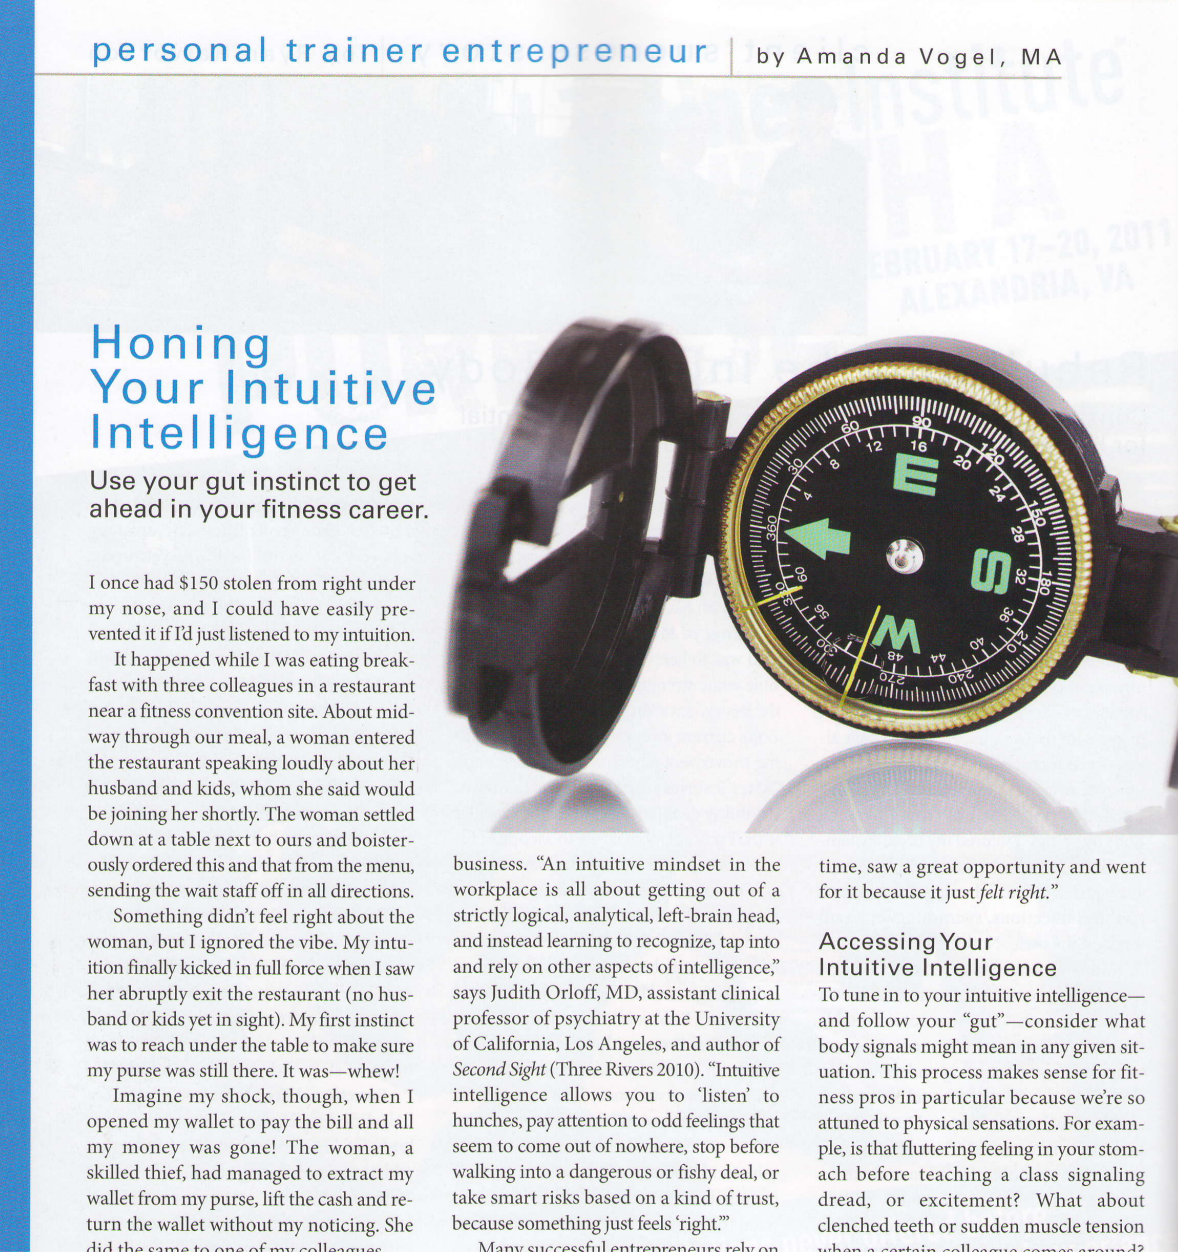 IDEA FITNESS JOURNAL, DECEMBER 2010: Honing Your Intuitive Intelligence: Use your gut instinct to get ahead in your fitness career.